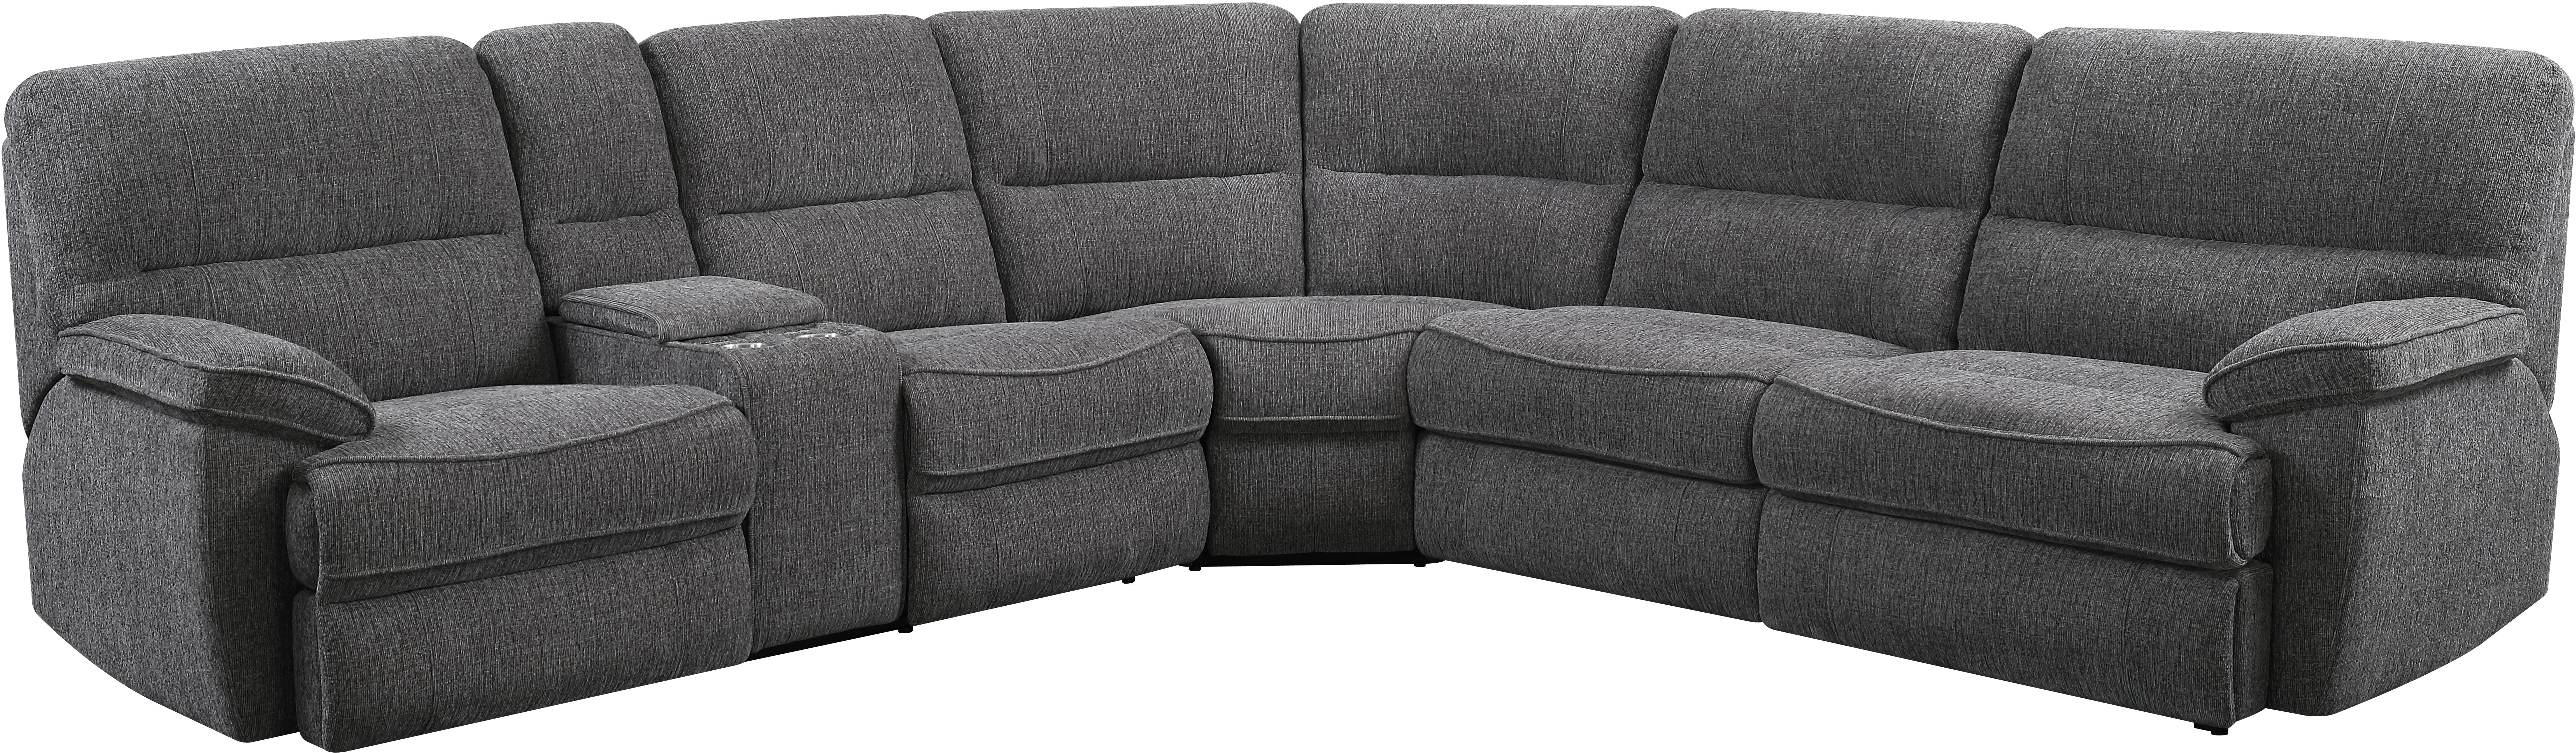 ROSCOE SECTIONAL SOFA  Pan Emirates is now Pan Home